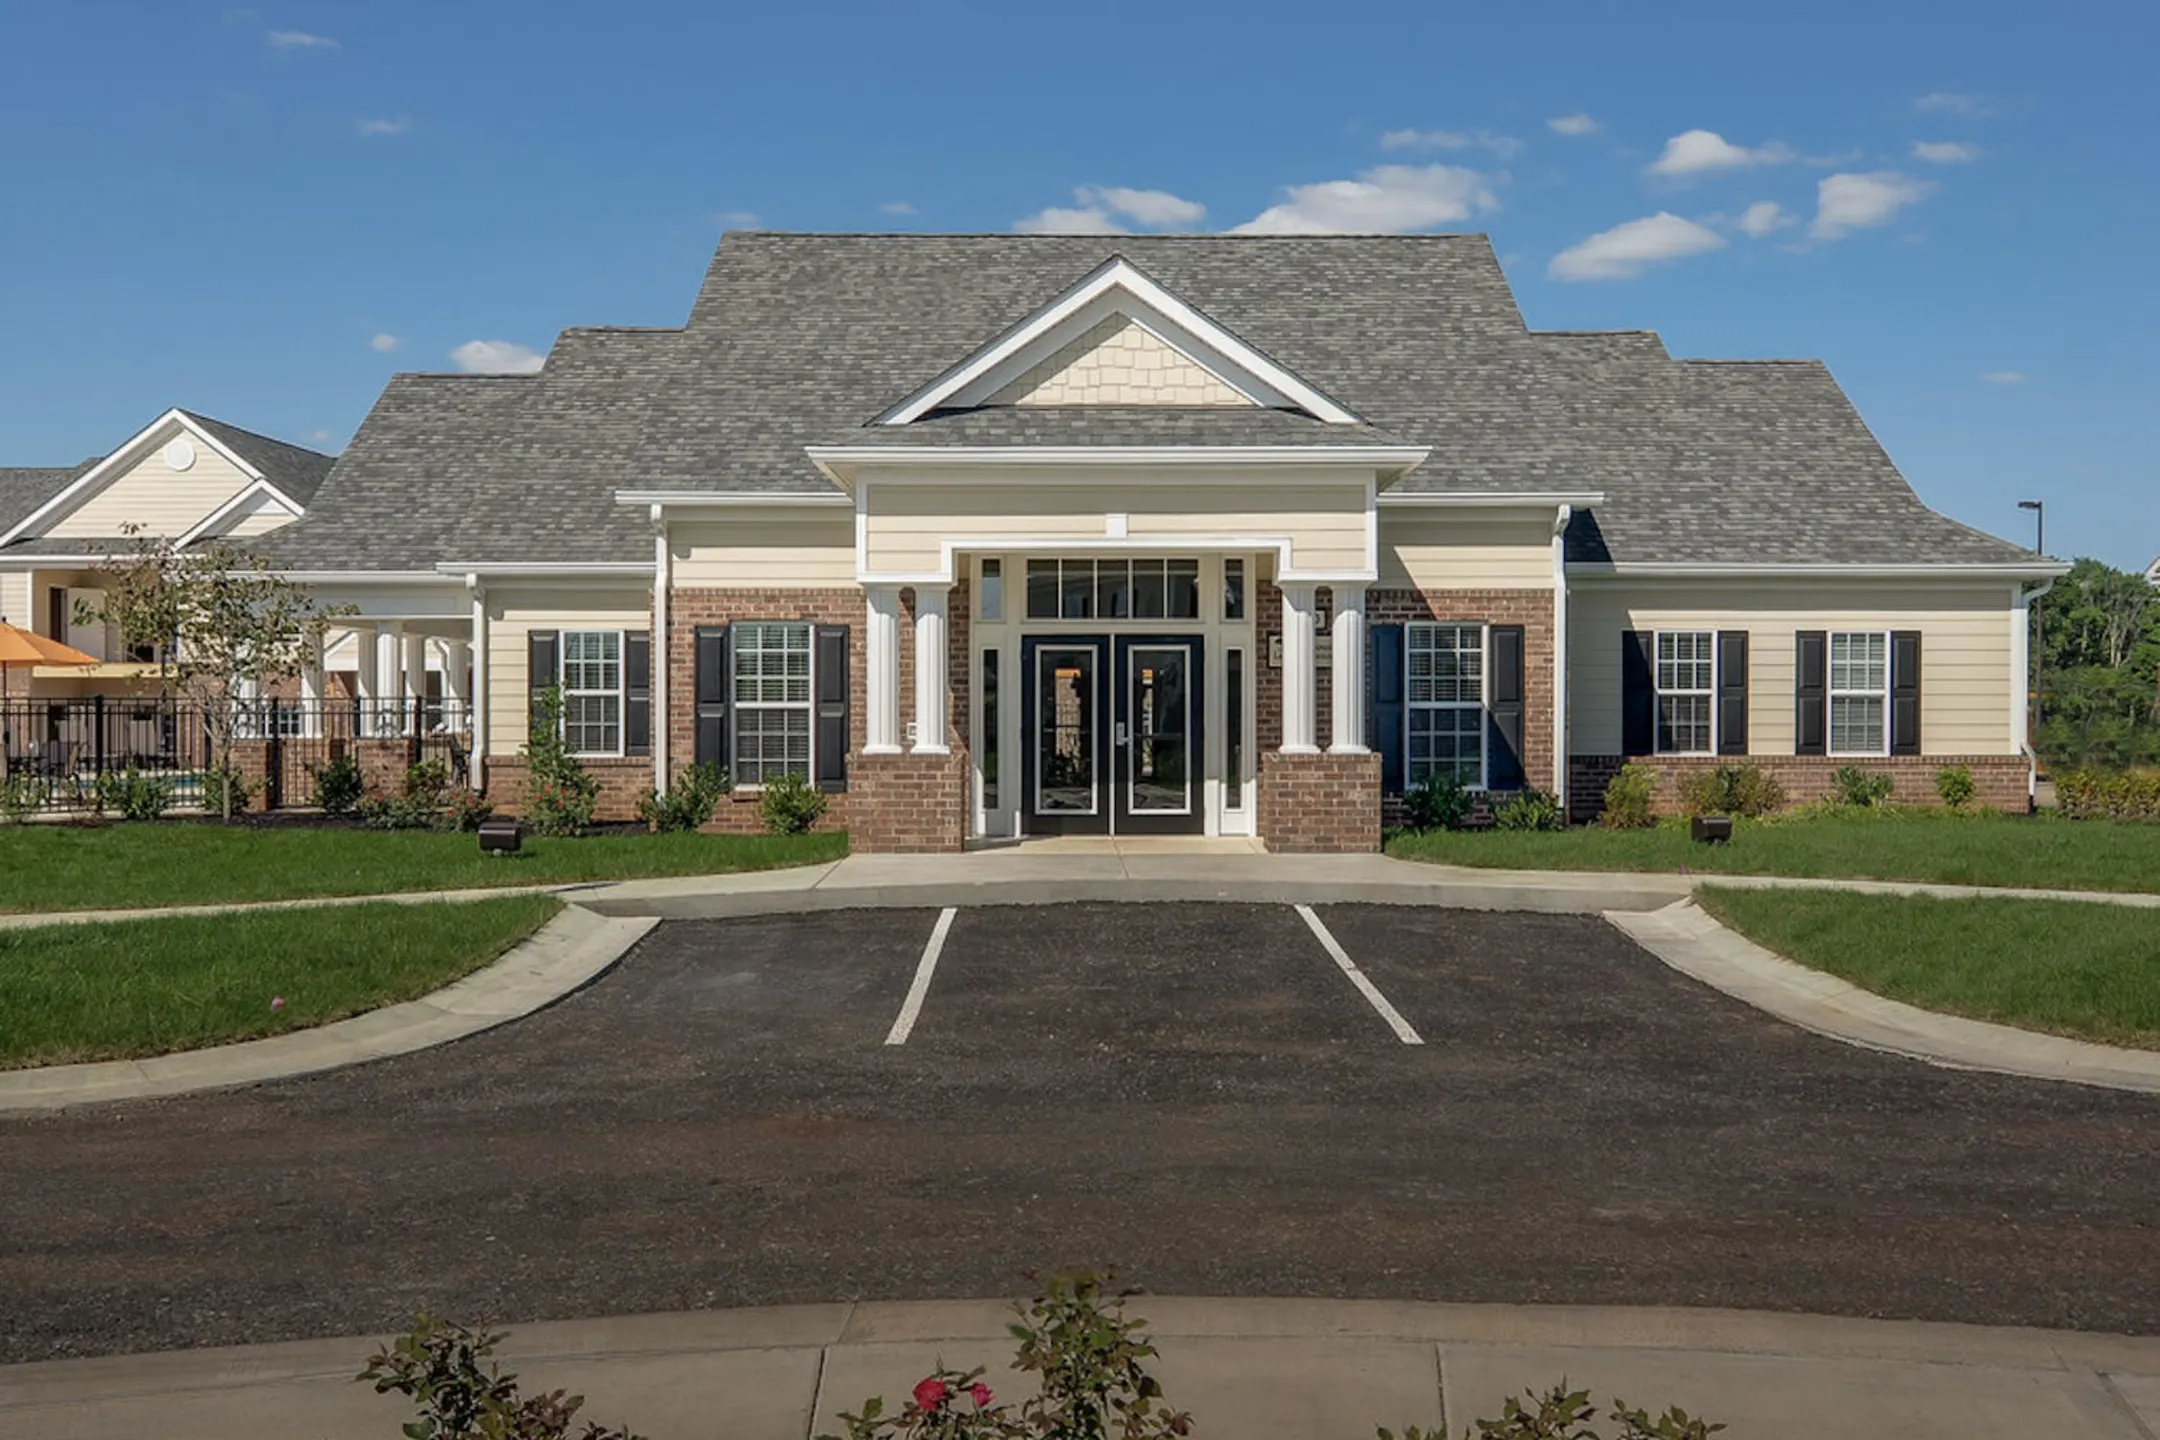 Building - Cumberland Trace Village Apartments - Bowling Green, KY